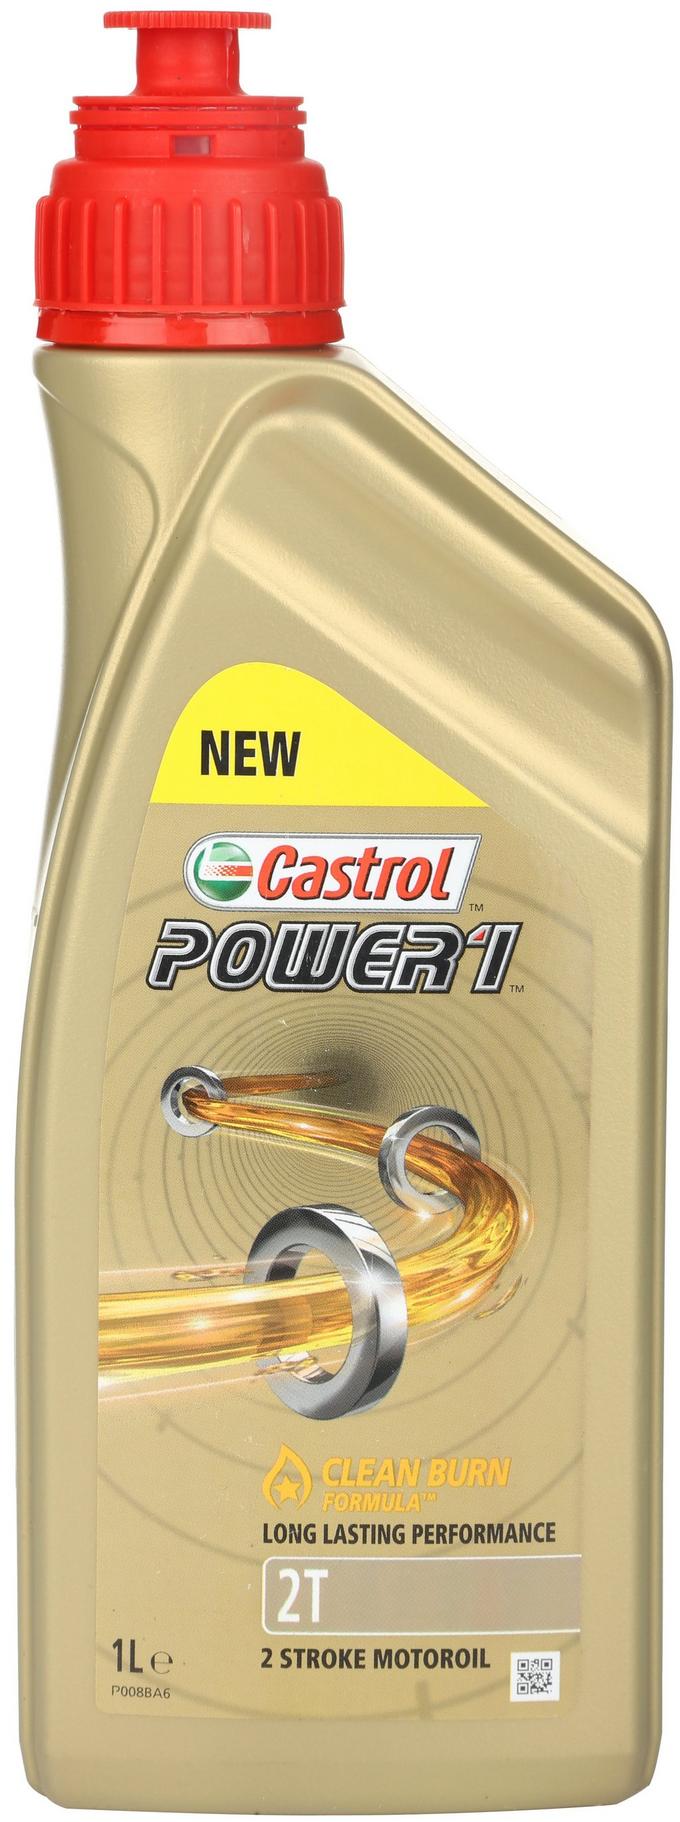 Castrol Power 1 Racing 2T Motorcycle Engine - 1ltr | Halfords